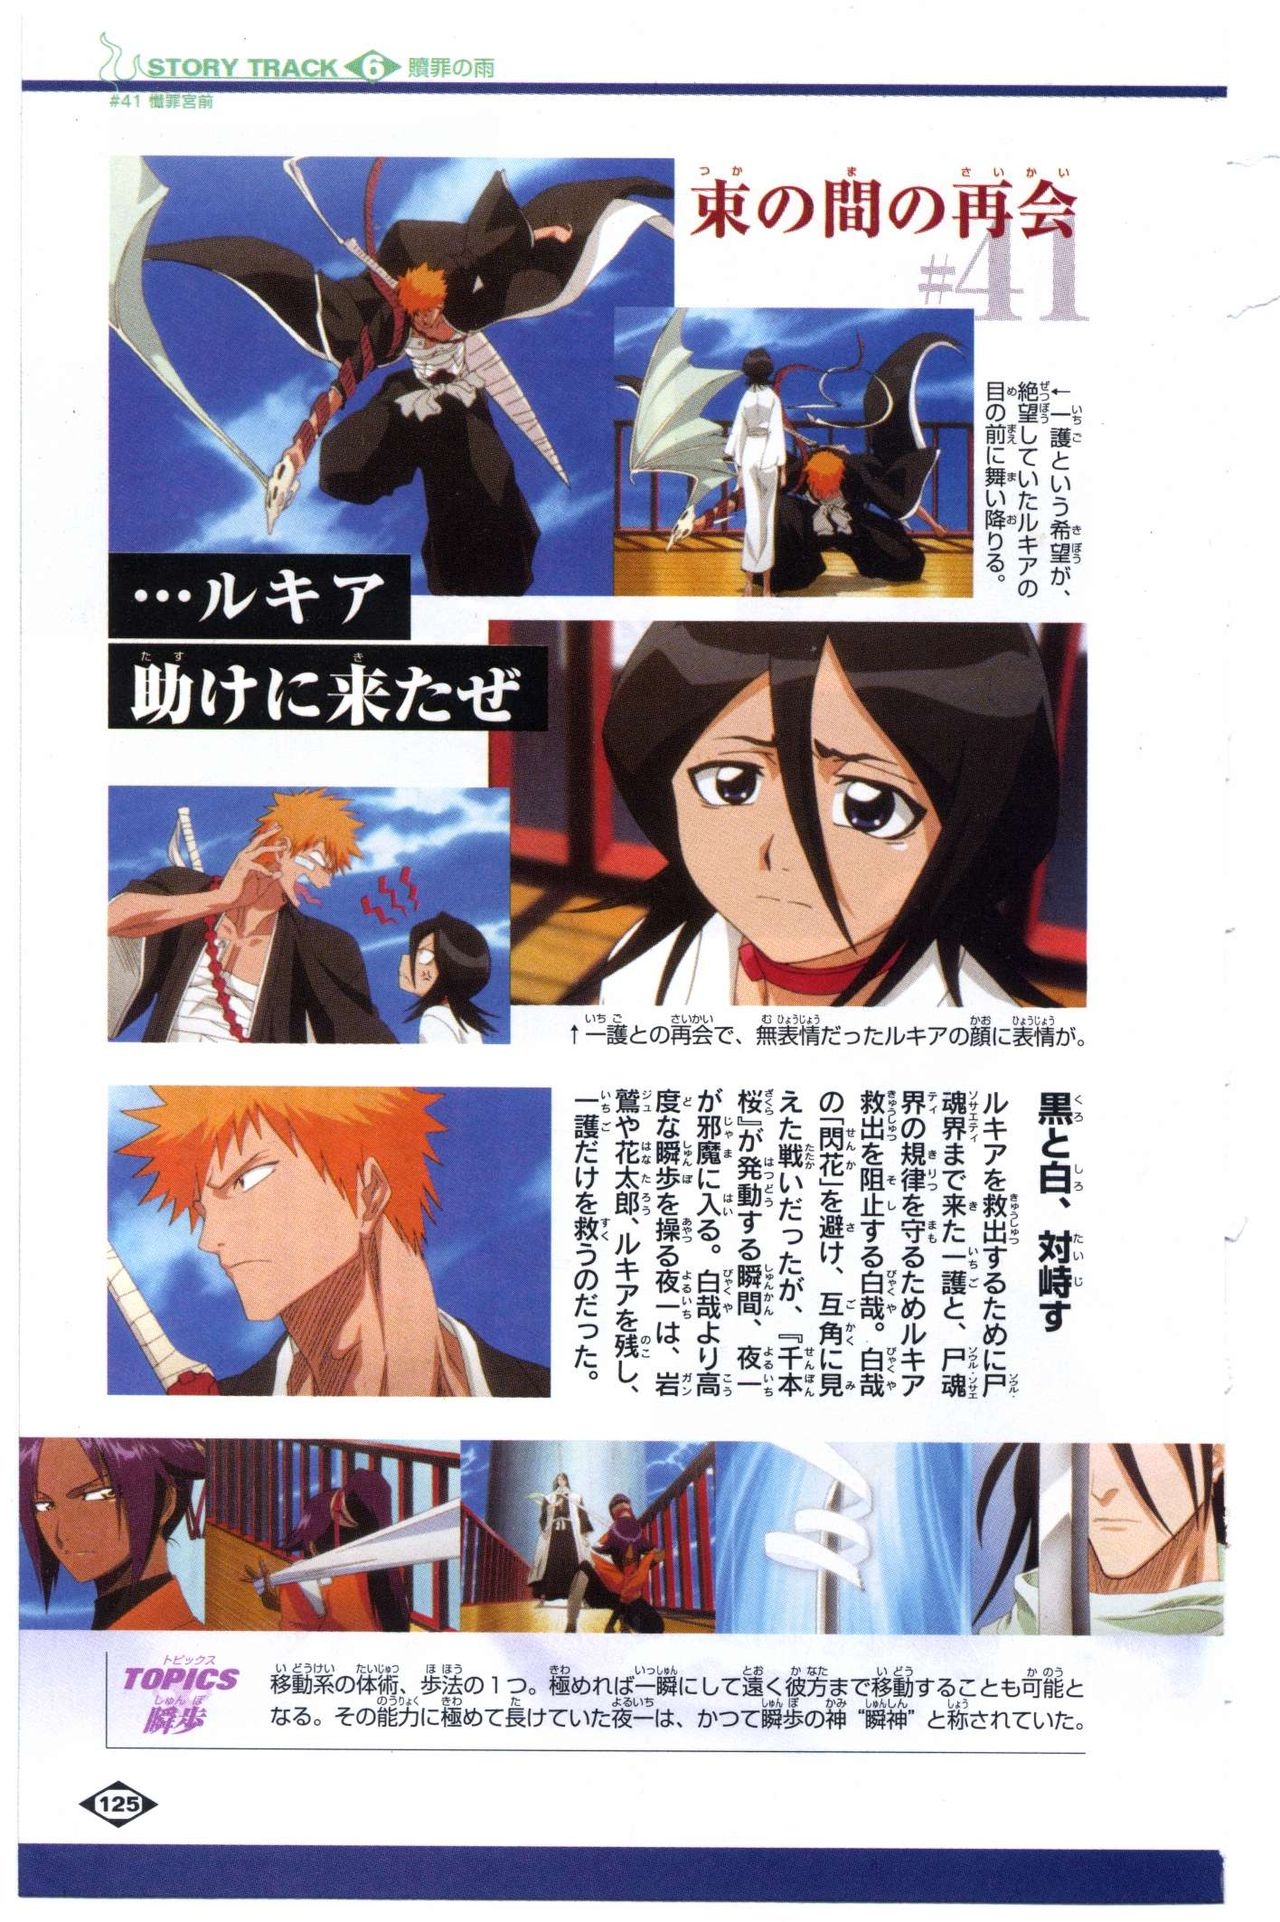 Bleach: Official Animation Book VIBEs 125